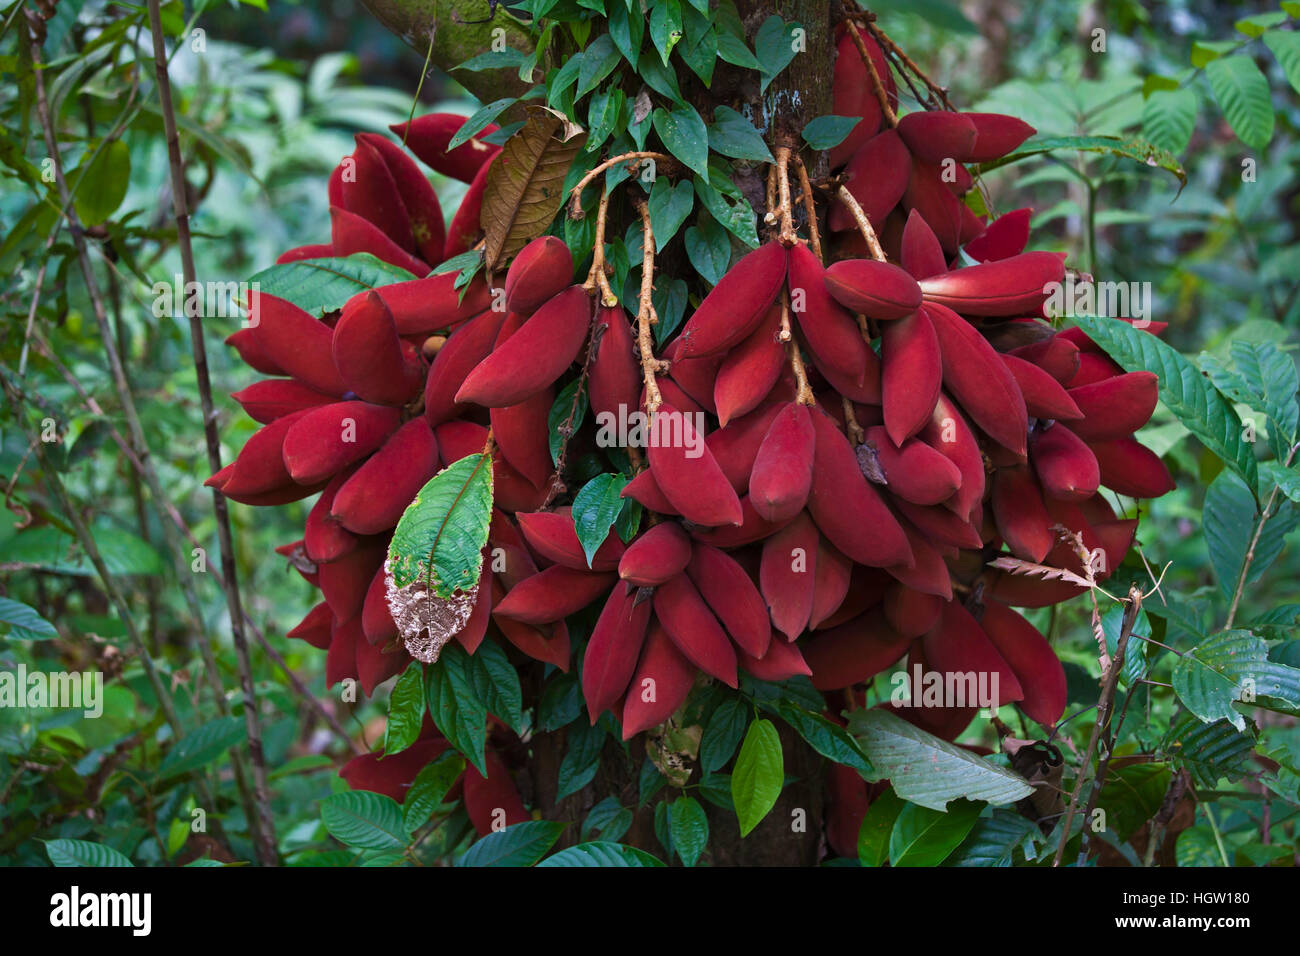 The Fruit Of The Kalumpang Tree, Sterculia Megistophylla, At The Rainforest Discovery Center Located In The Kabili Sepilok Forest In Sabah Near The City Of Sandakan, Malaysia, Borneo Stock Photo